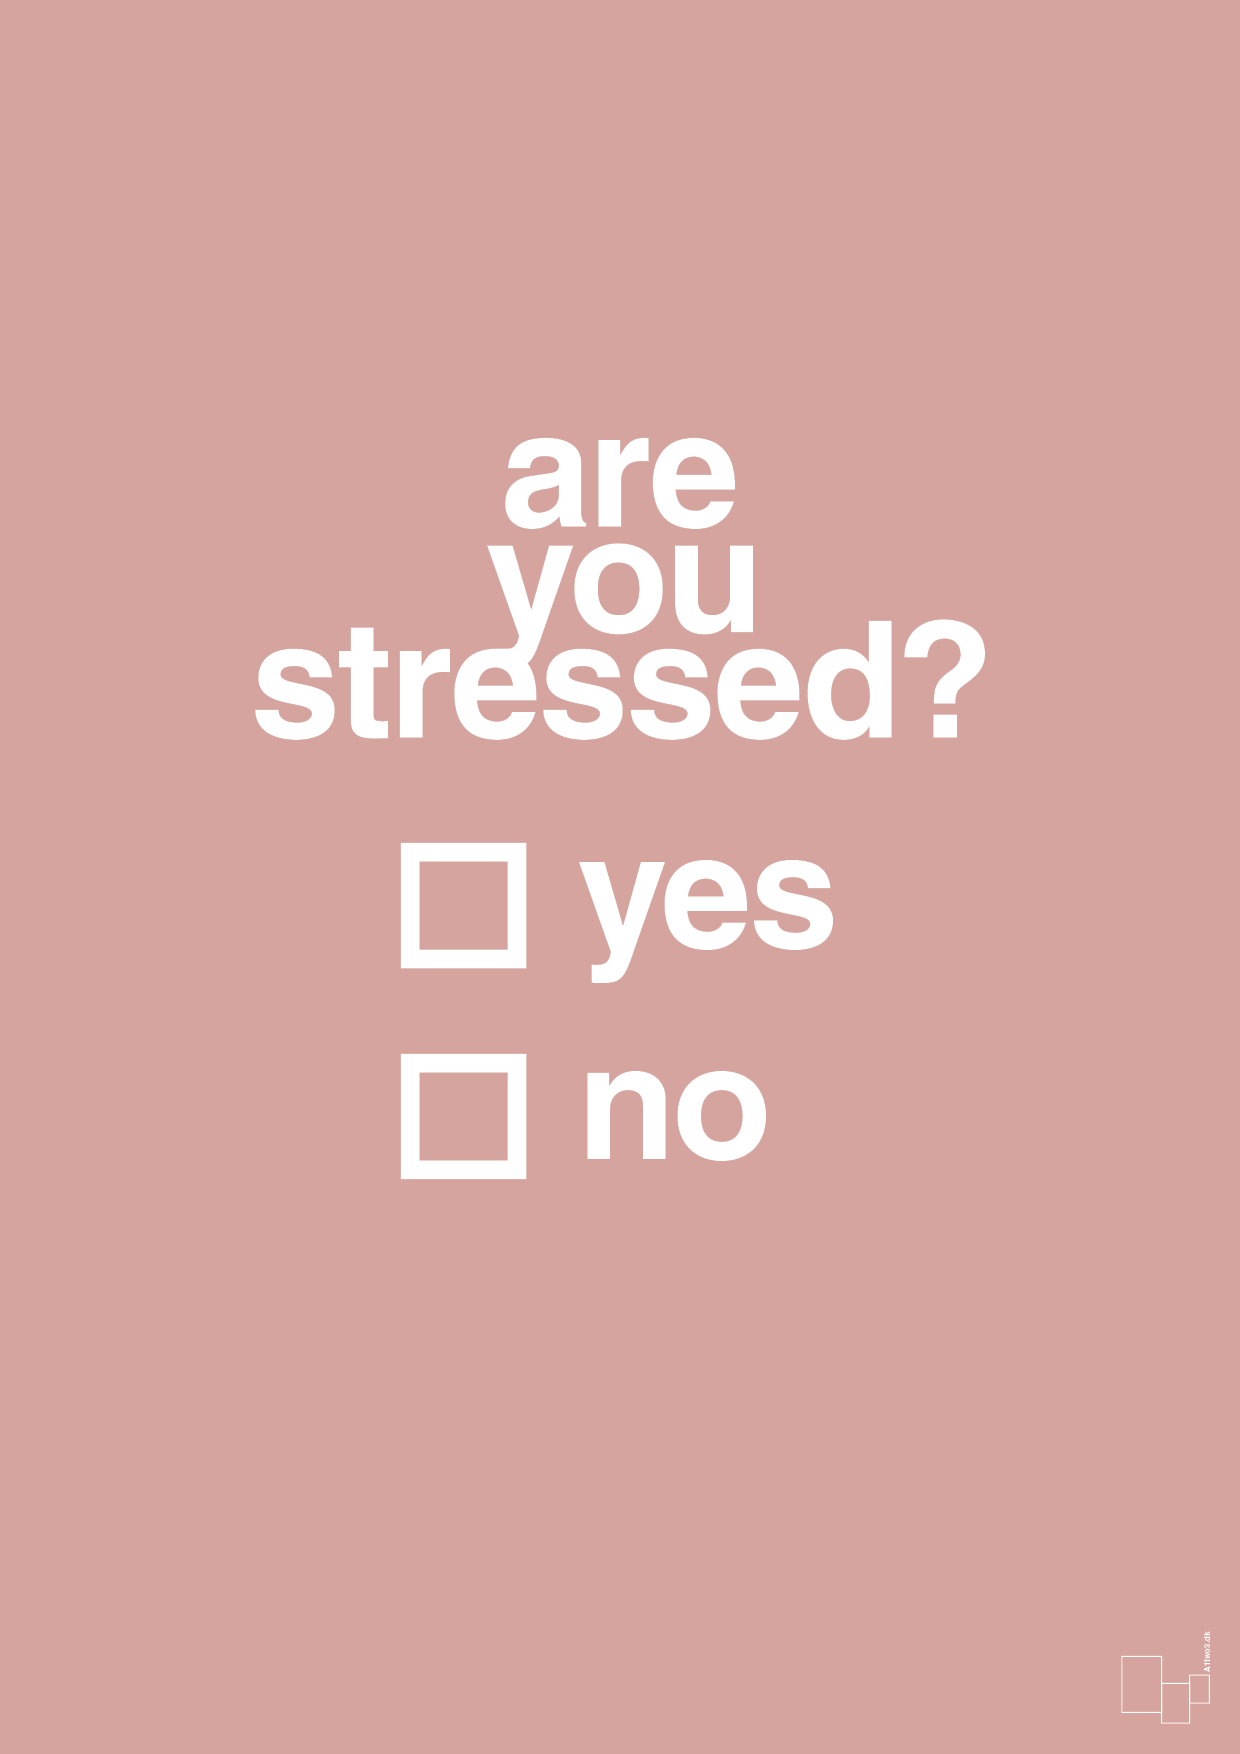 are you stressed - Plakat med Ordsprog i Bubble Shell